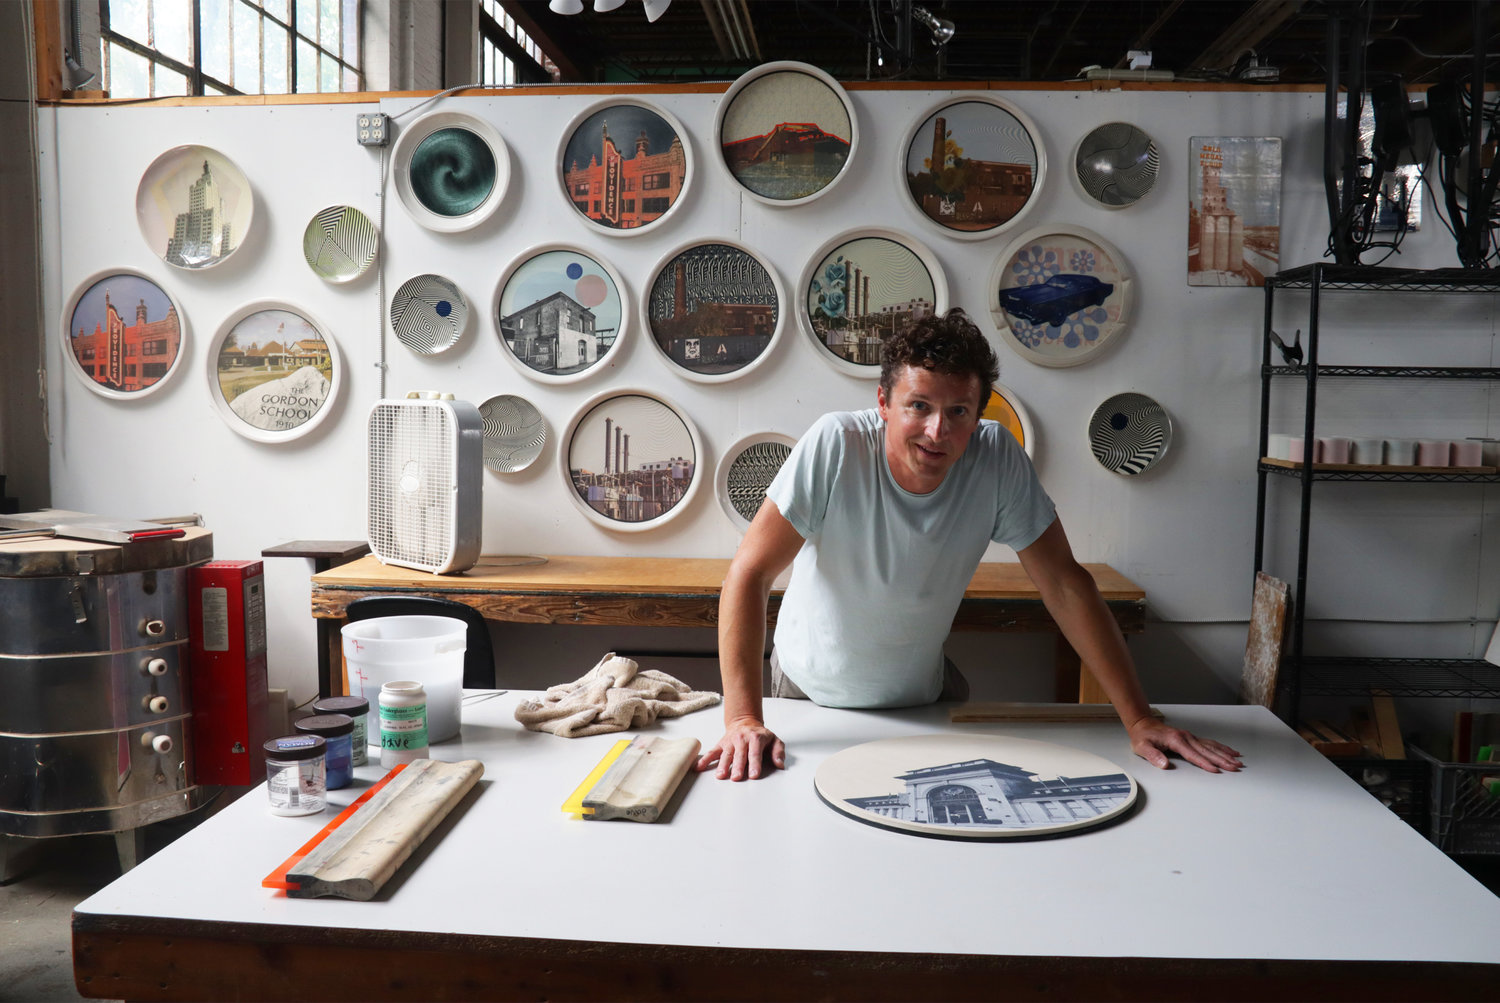 Artist David Allyn combines screen printing and ceramic art in his Nicholson File space